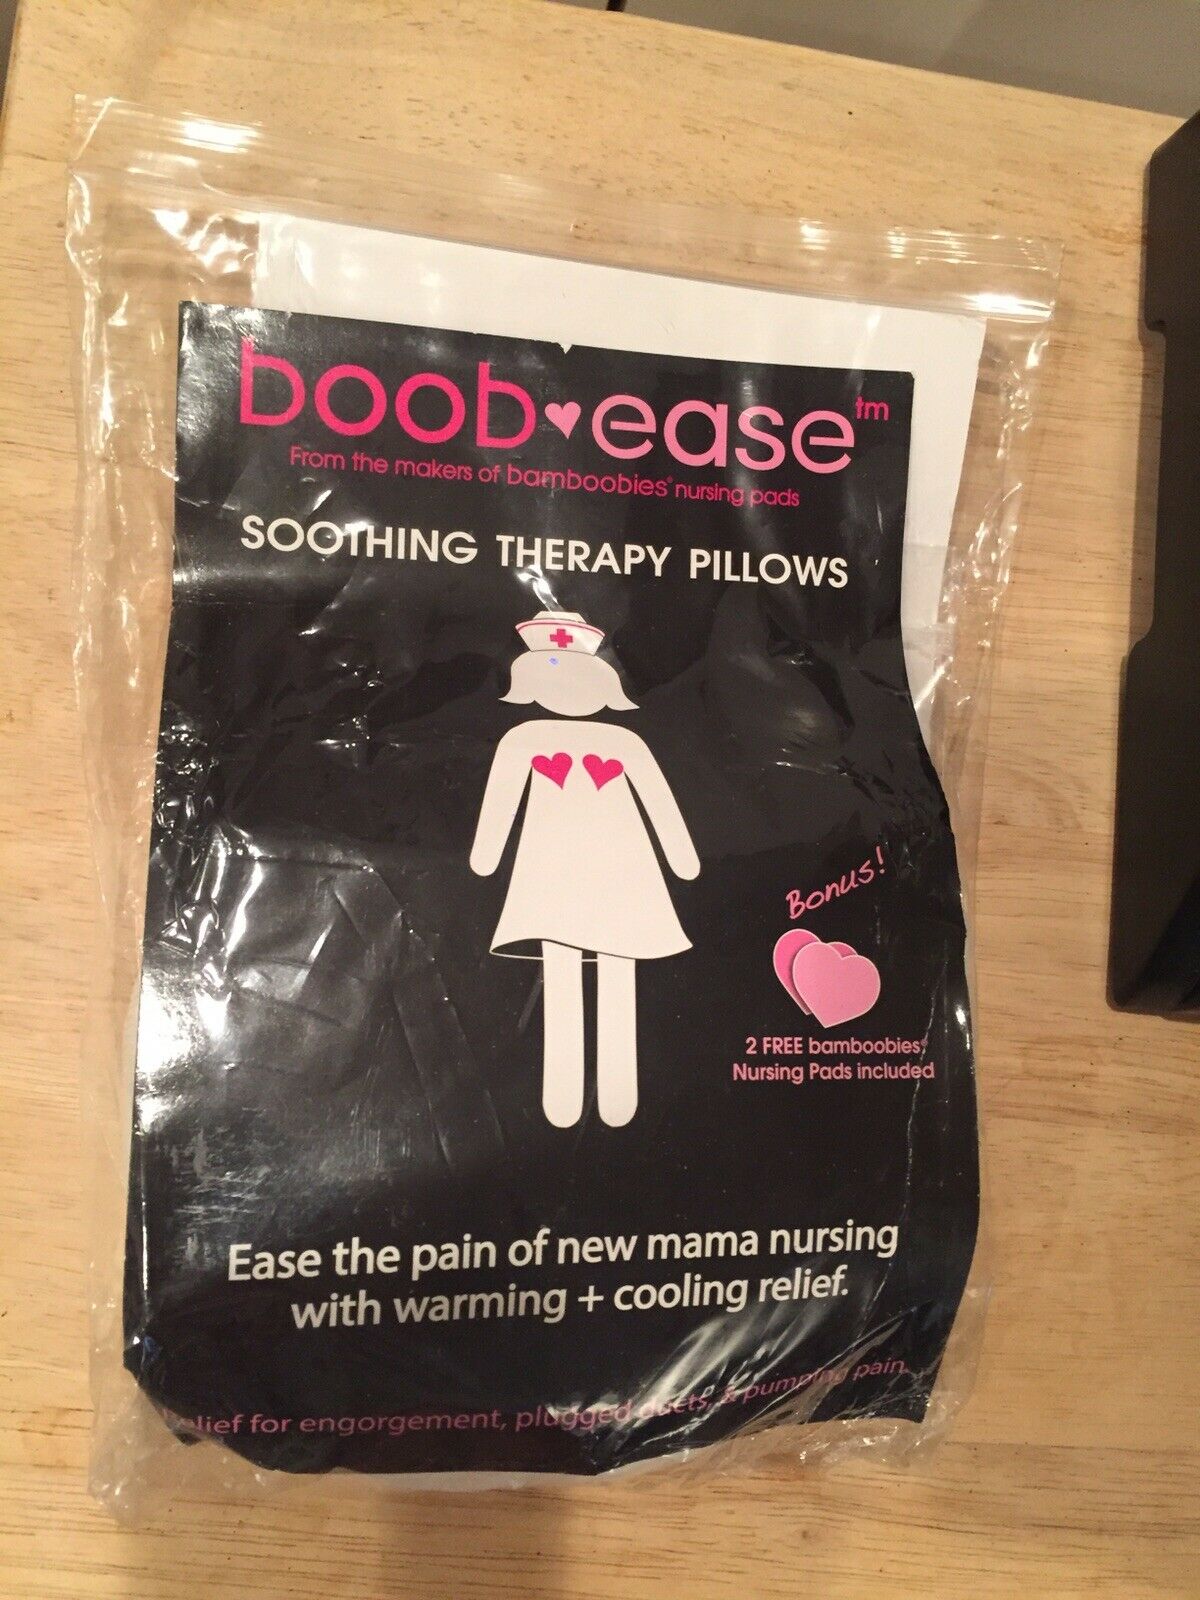 Boob Ease Soothing Therapy Pillows Nursing Cooling Warming Relief W Bonus Pads